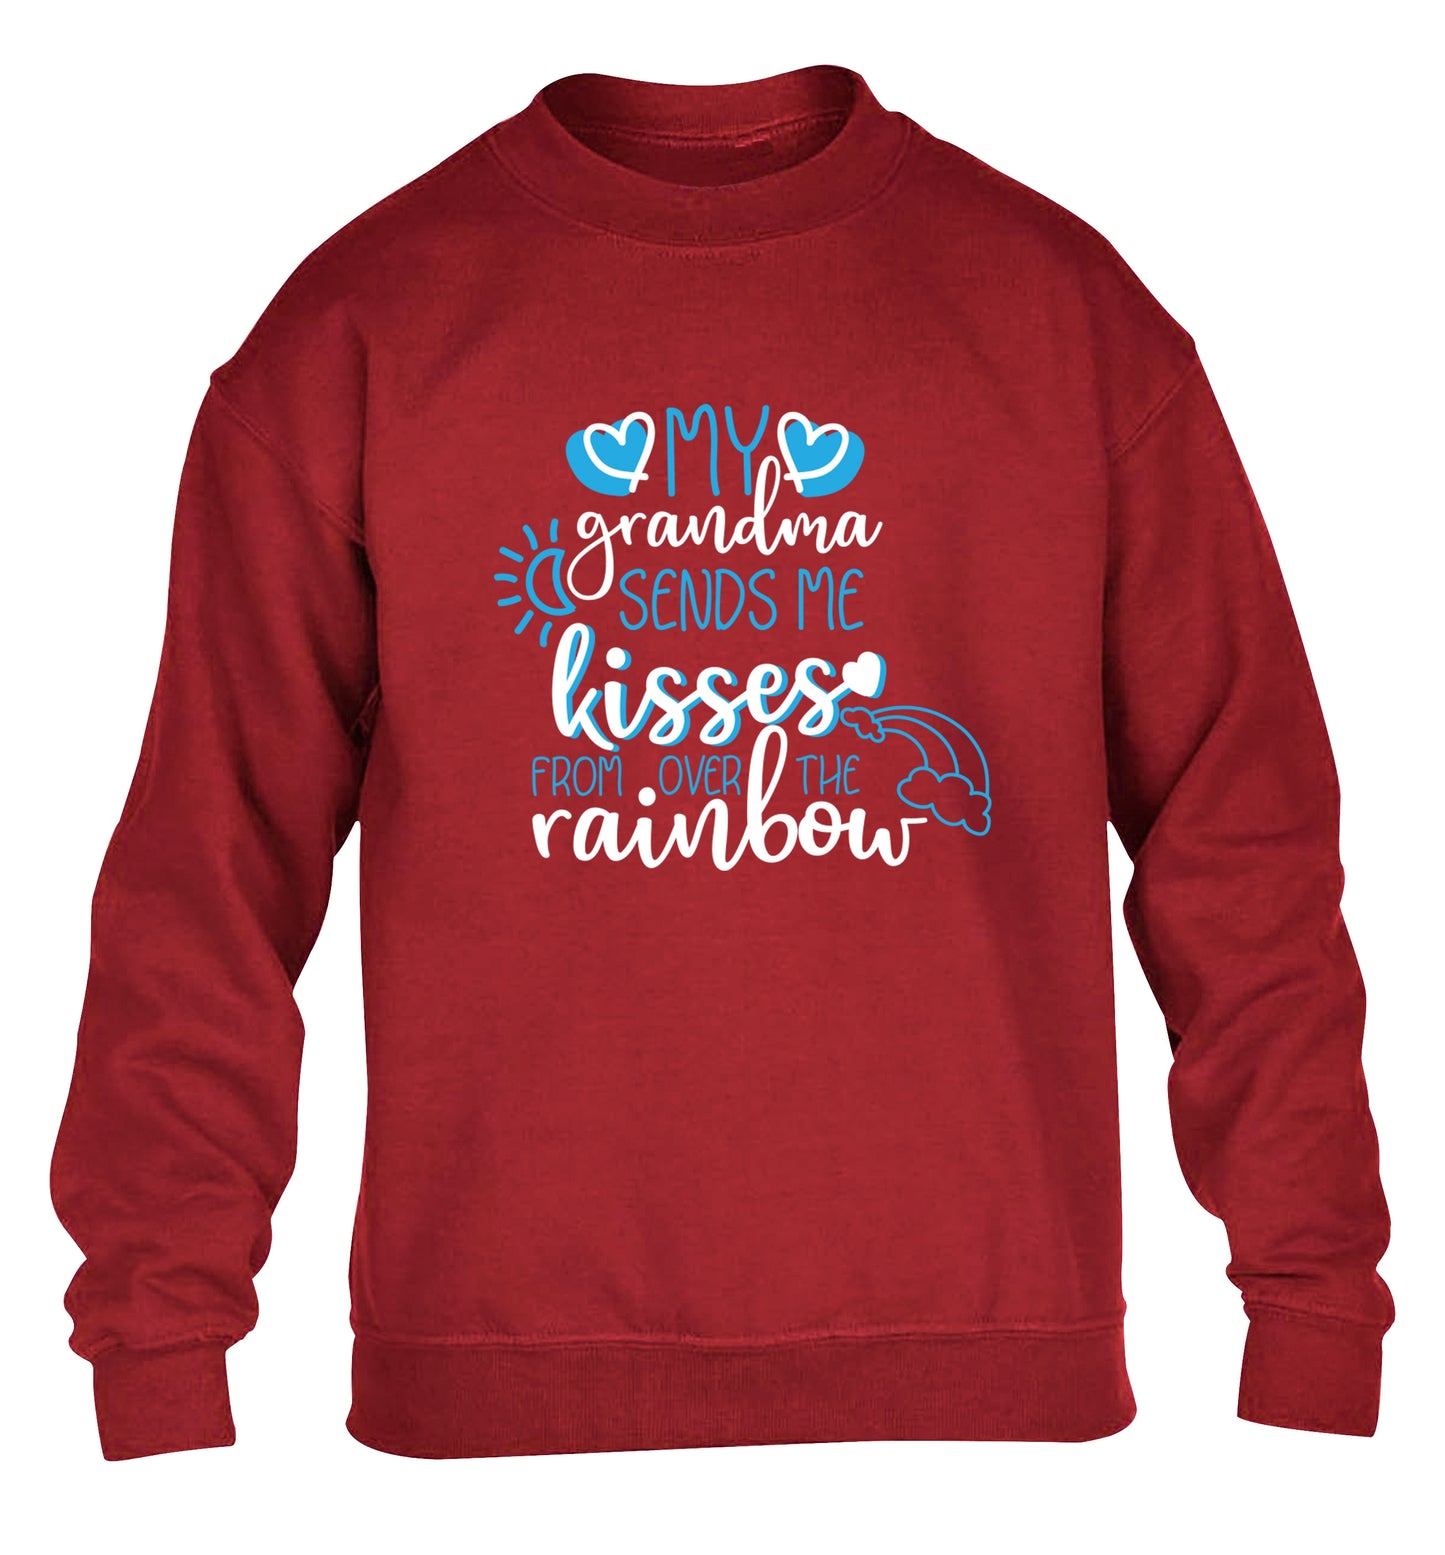 My grandma sends me kisses from over the rainbow children's grey sweater 12-13 Years